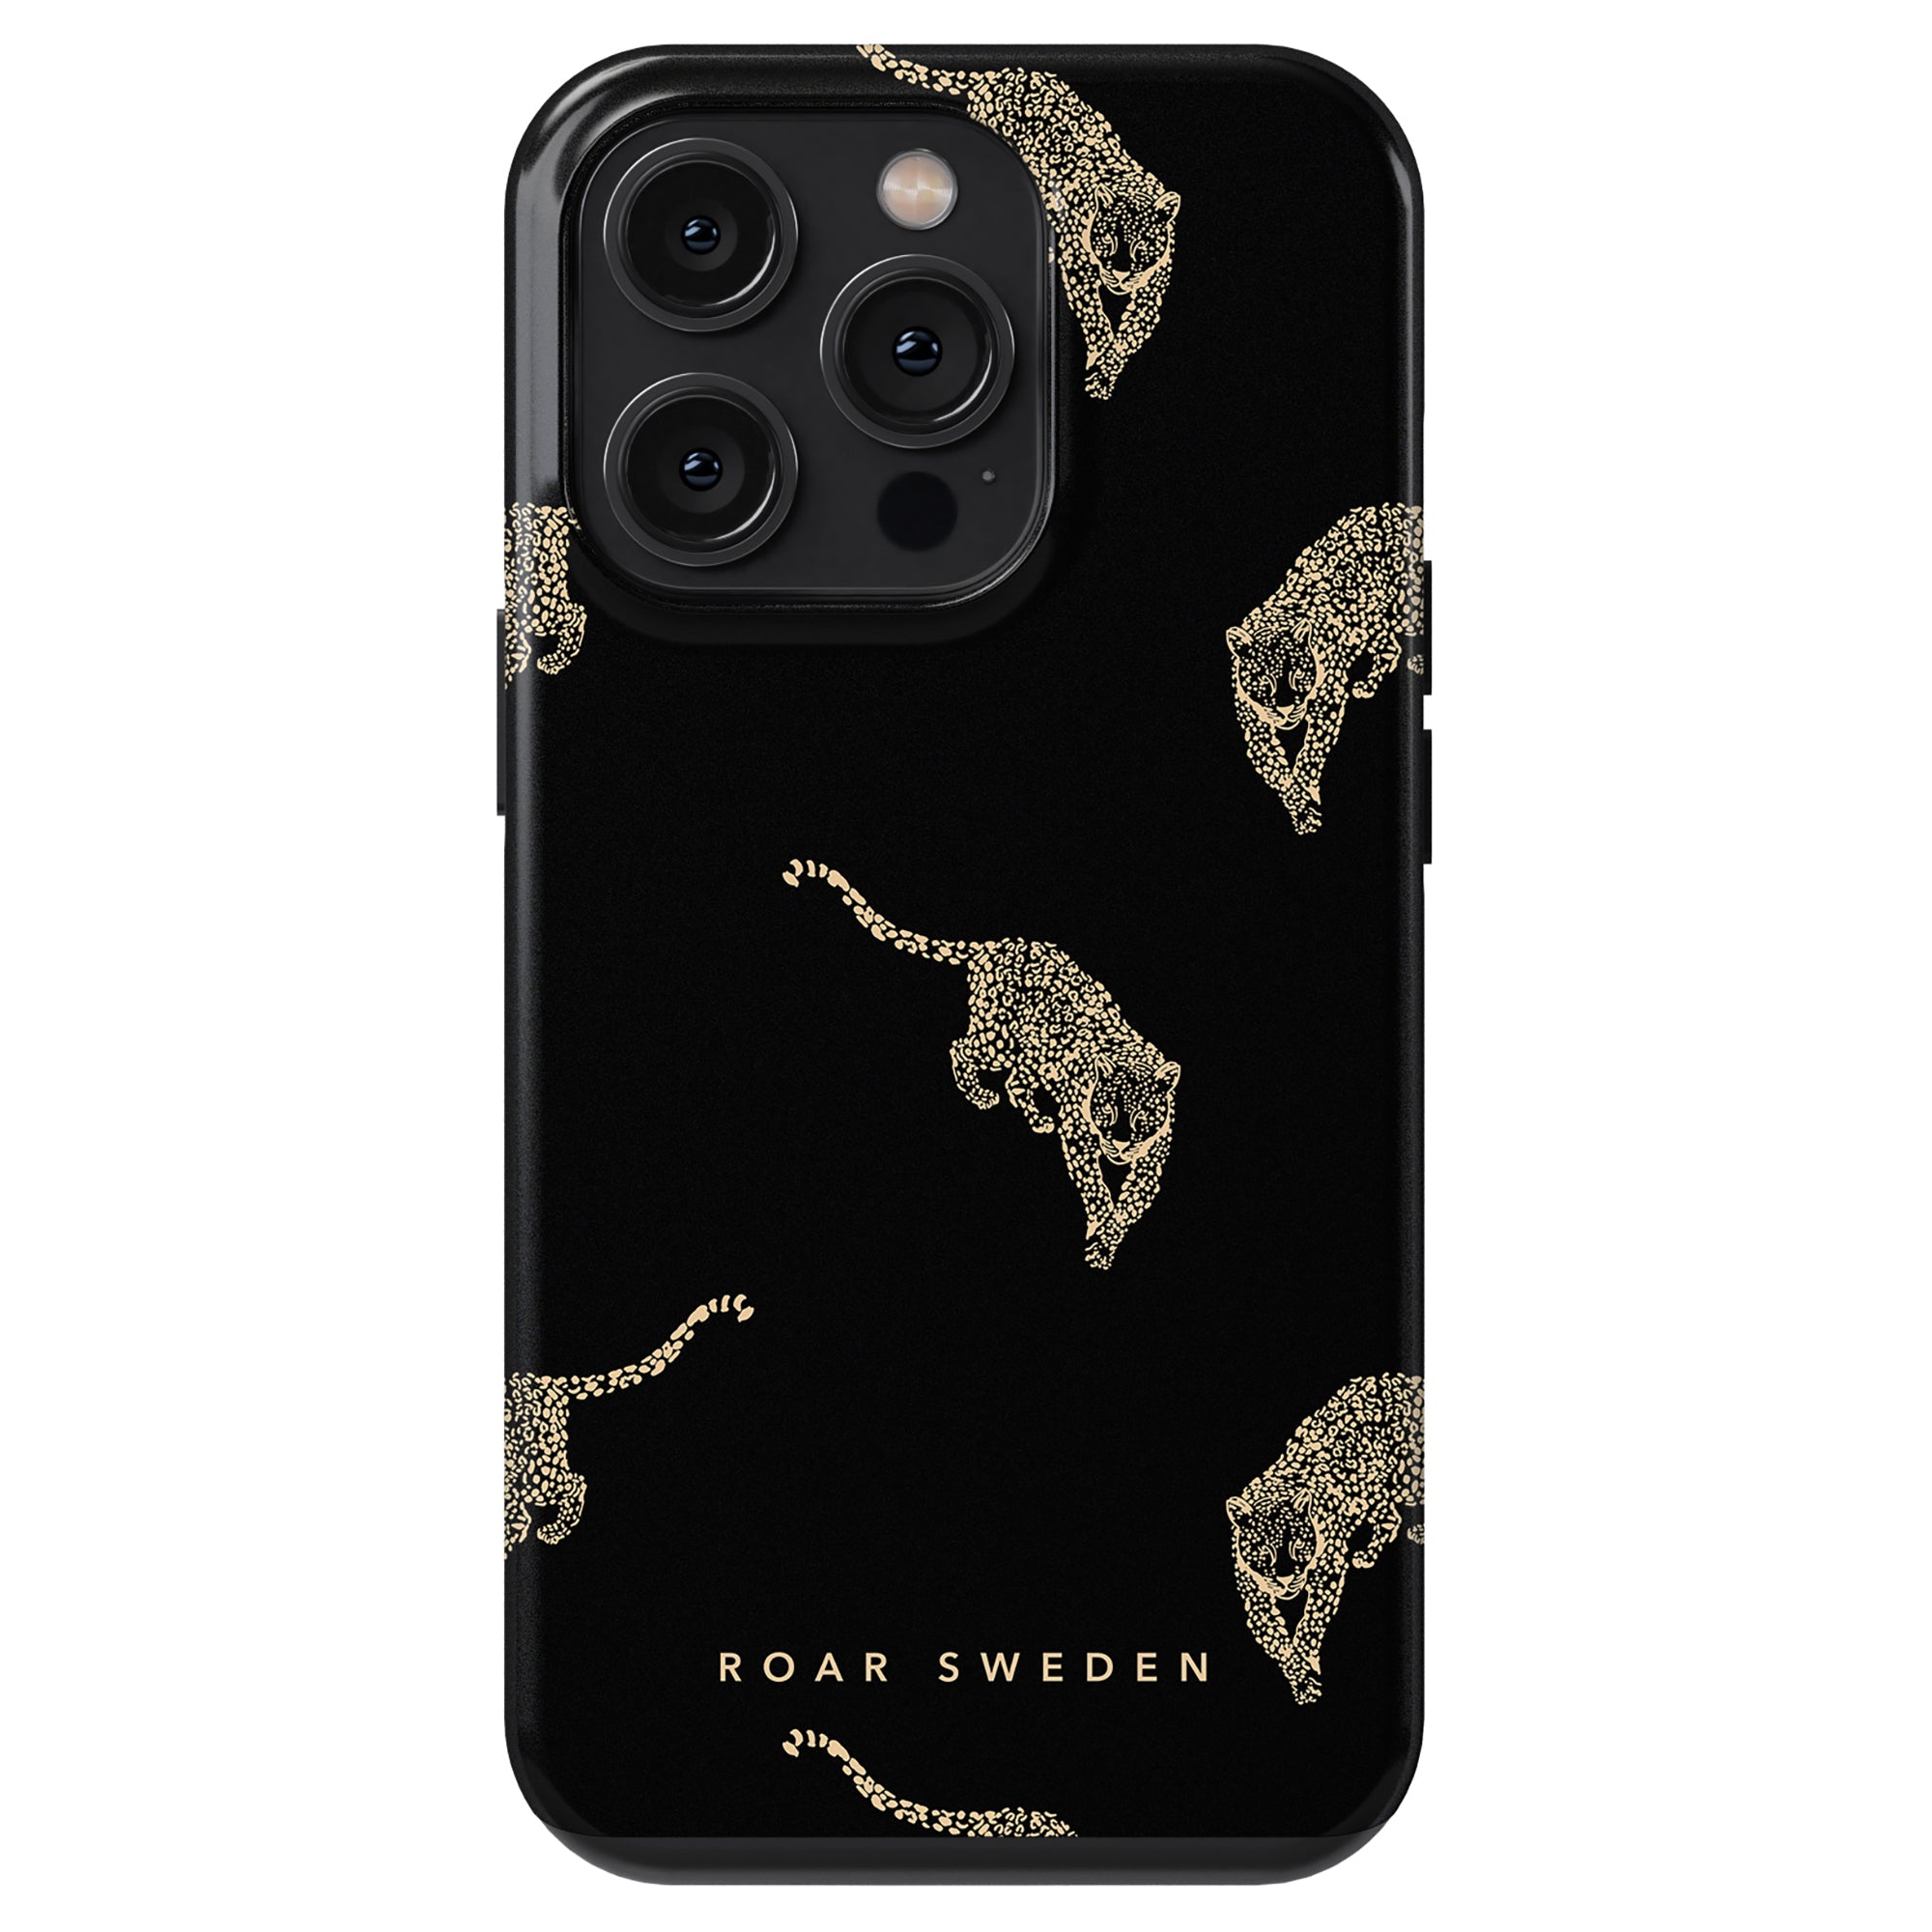 A Kitty Black - Tough Case with a hint of leopard print.